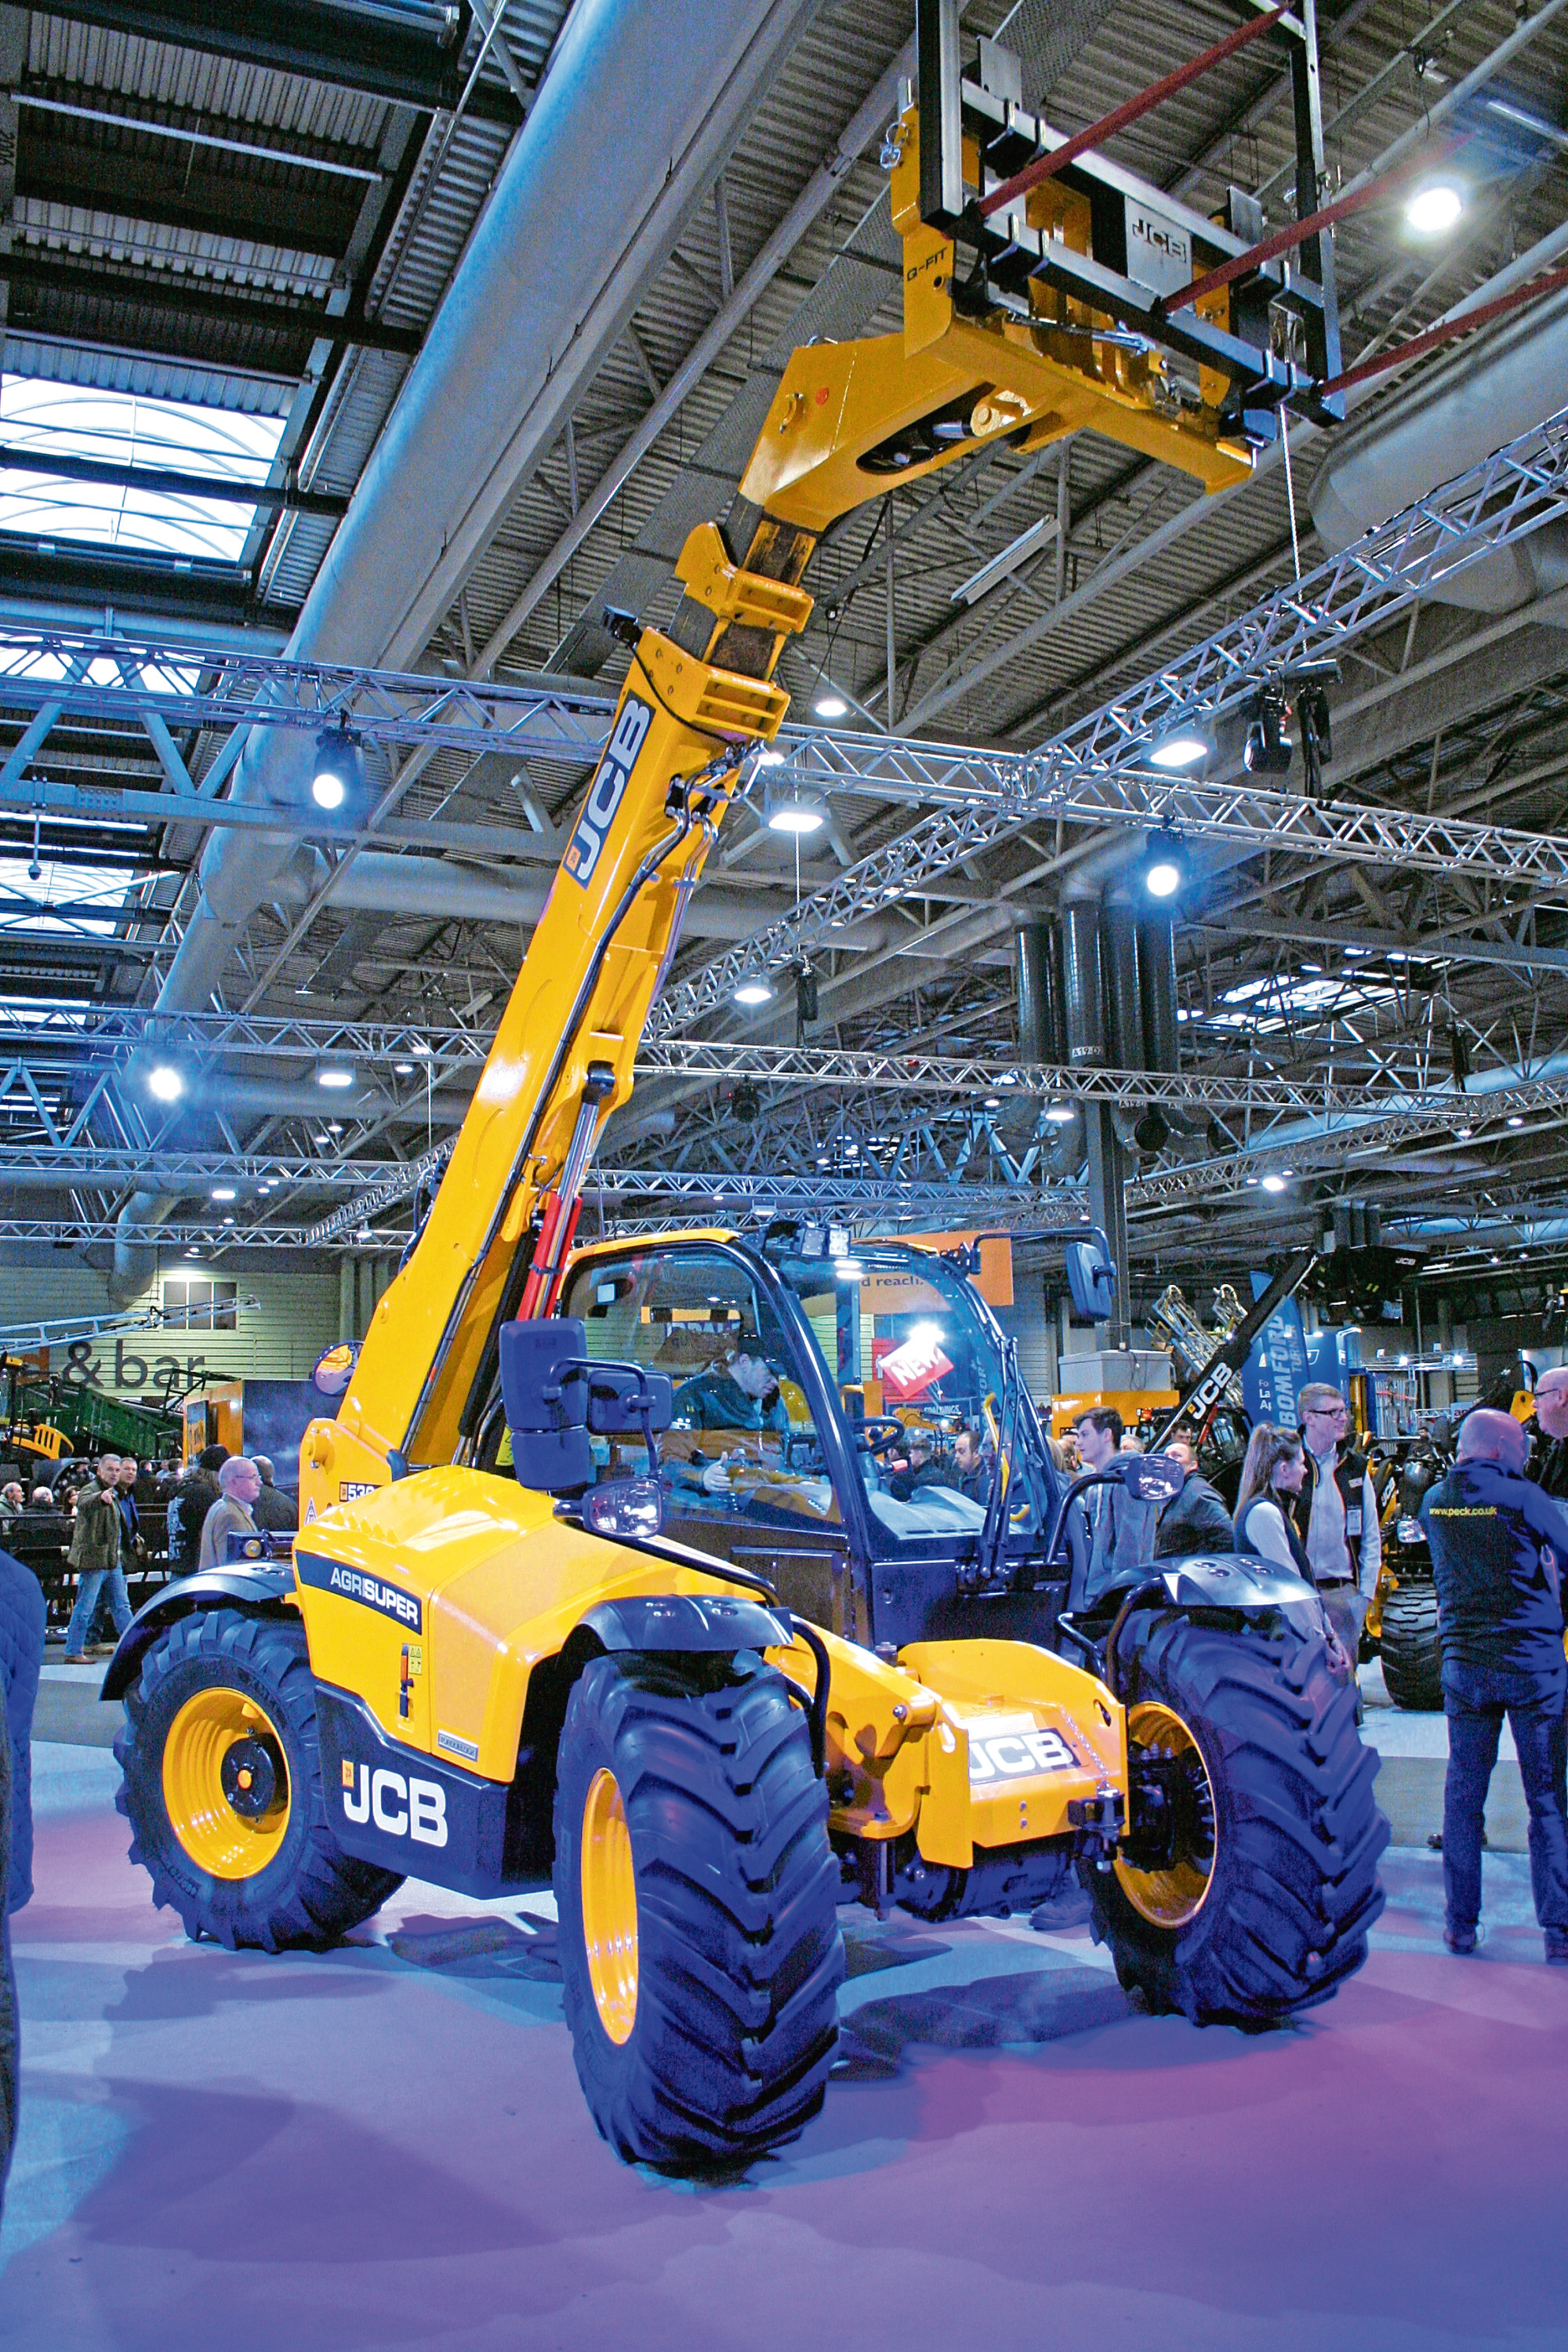 Third-generation JCB Loadall telehandlers build on powertrain and hydraulic developments from previous upgrades with an all-new cab.